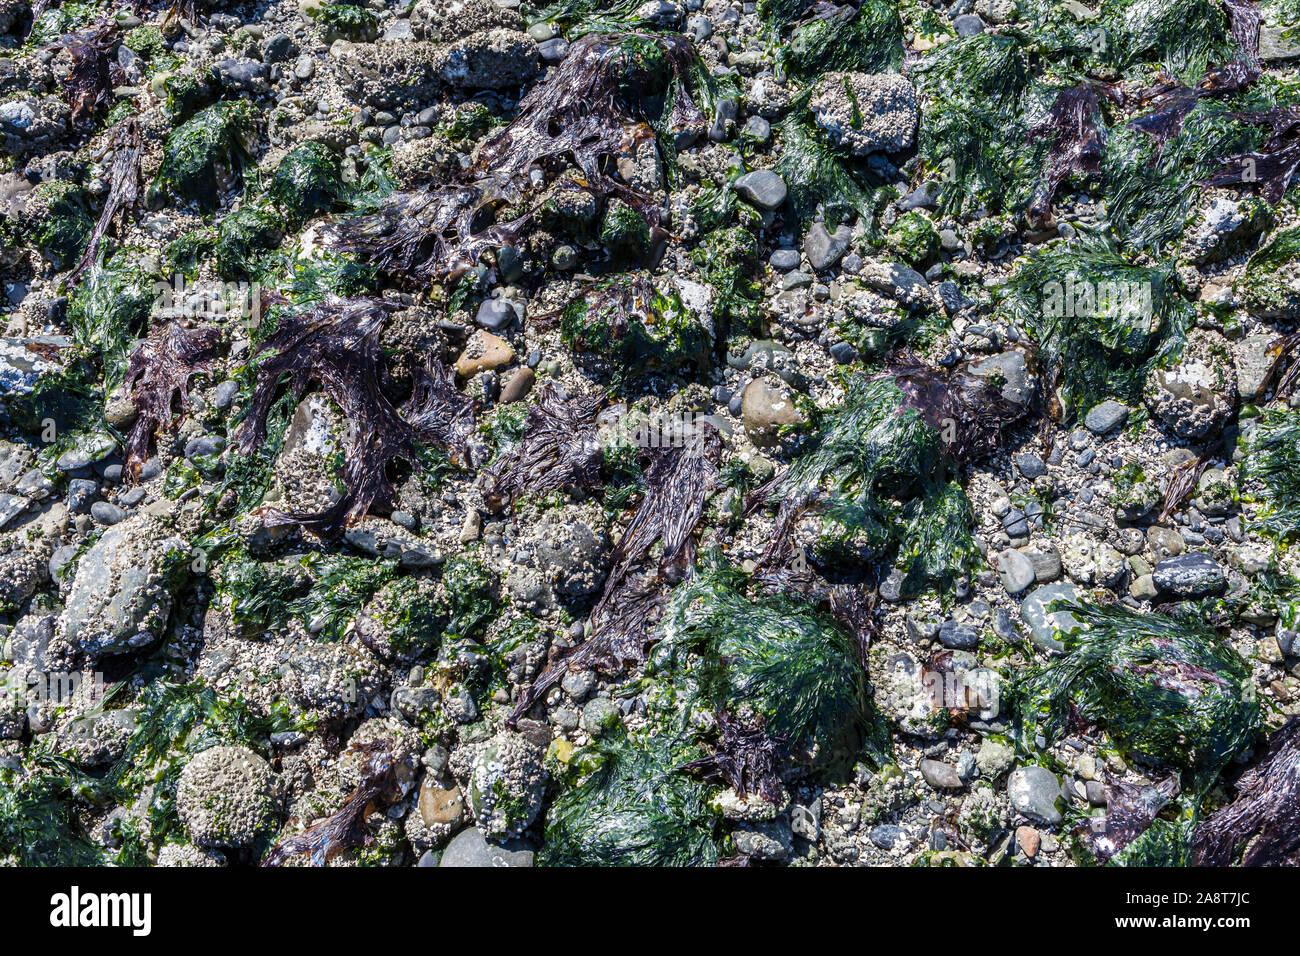 A closeup of the barnacle and sea lettuce covered rocks and things in the intertidal zone off North Beach on Orcas Island, Washington, USA. Stock Photo